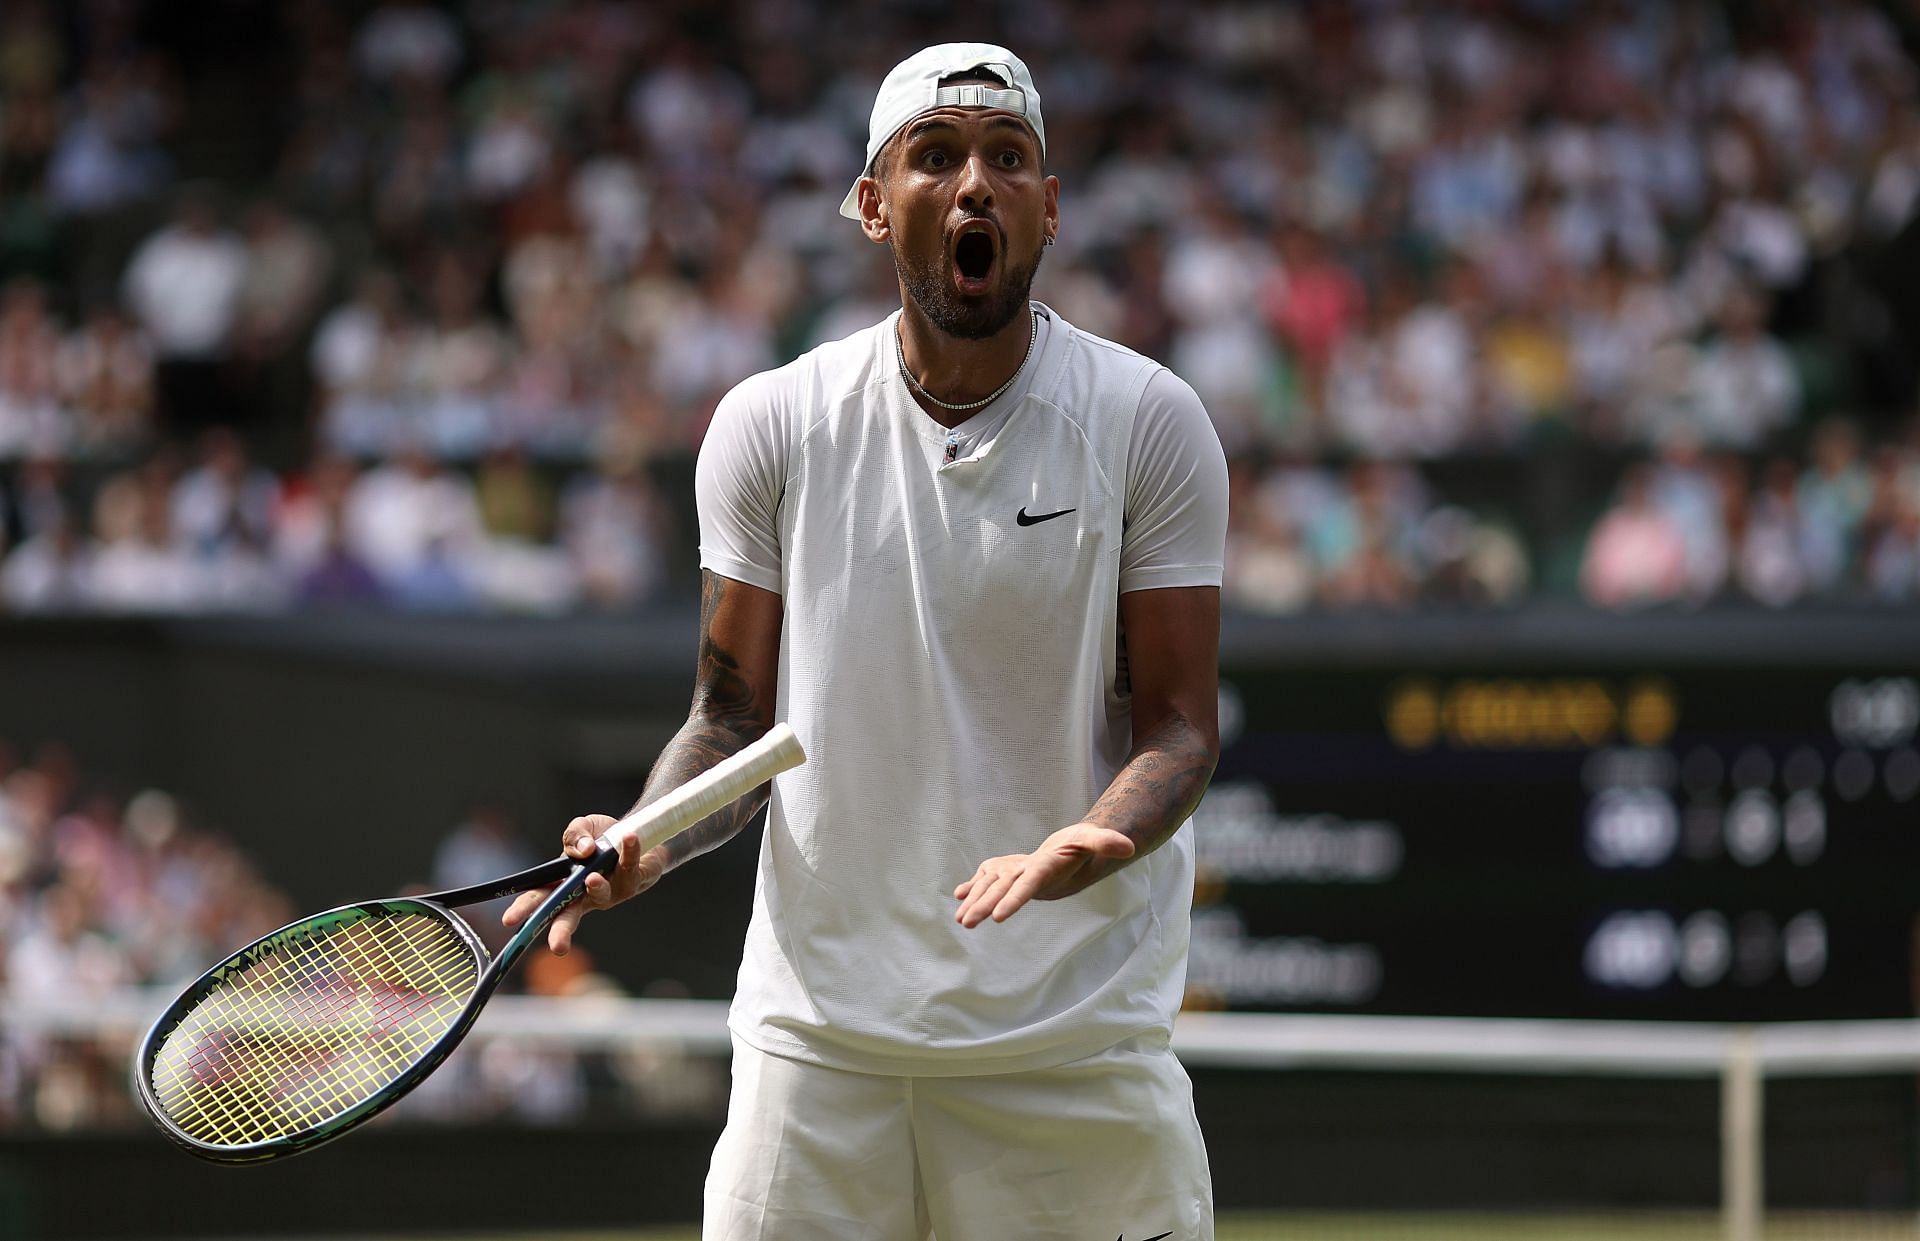 Nick Kyrgios reacts angrily in his match against Novak Djokovic